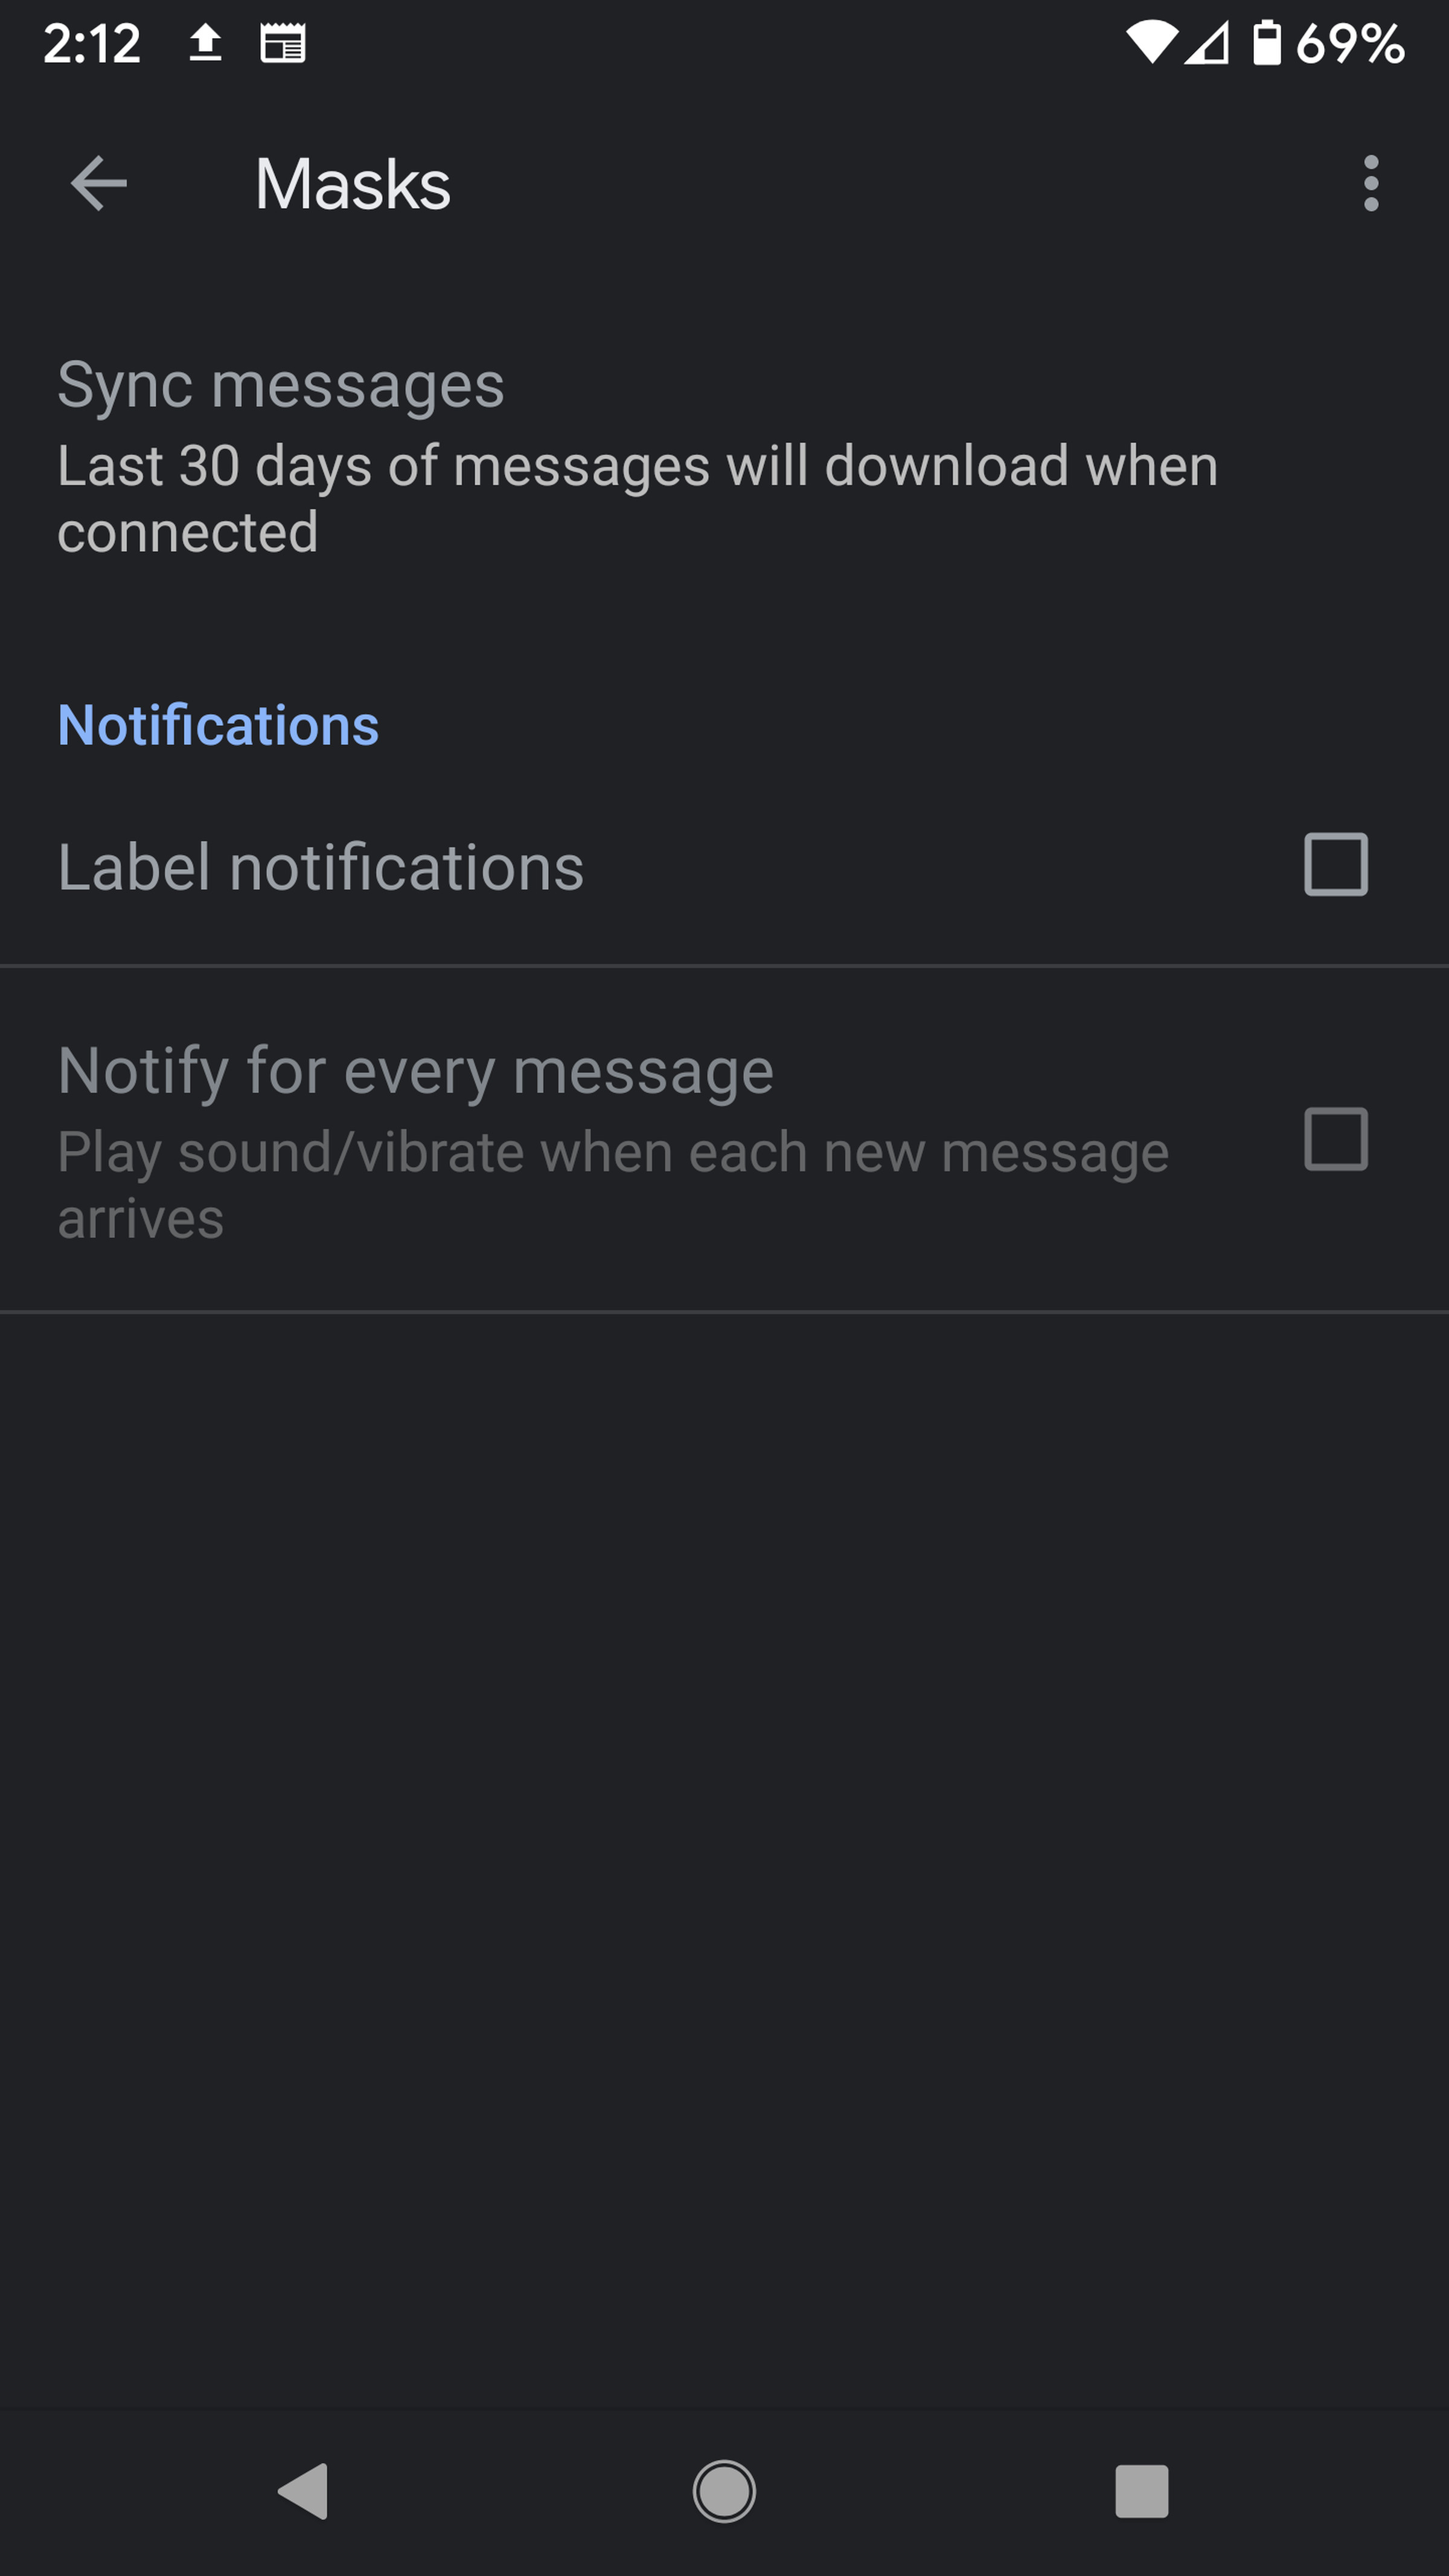 You can set notifications when a labeled email arrives.